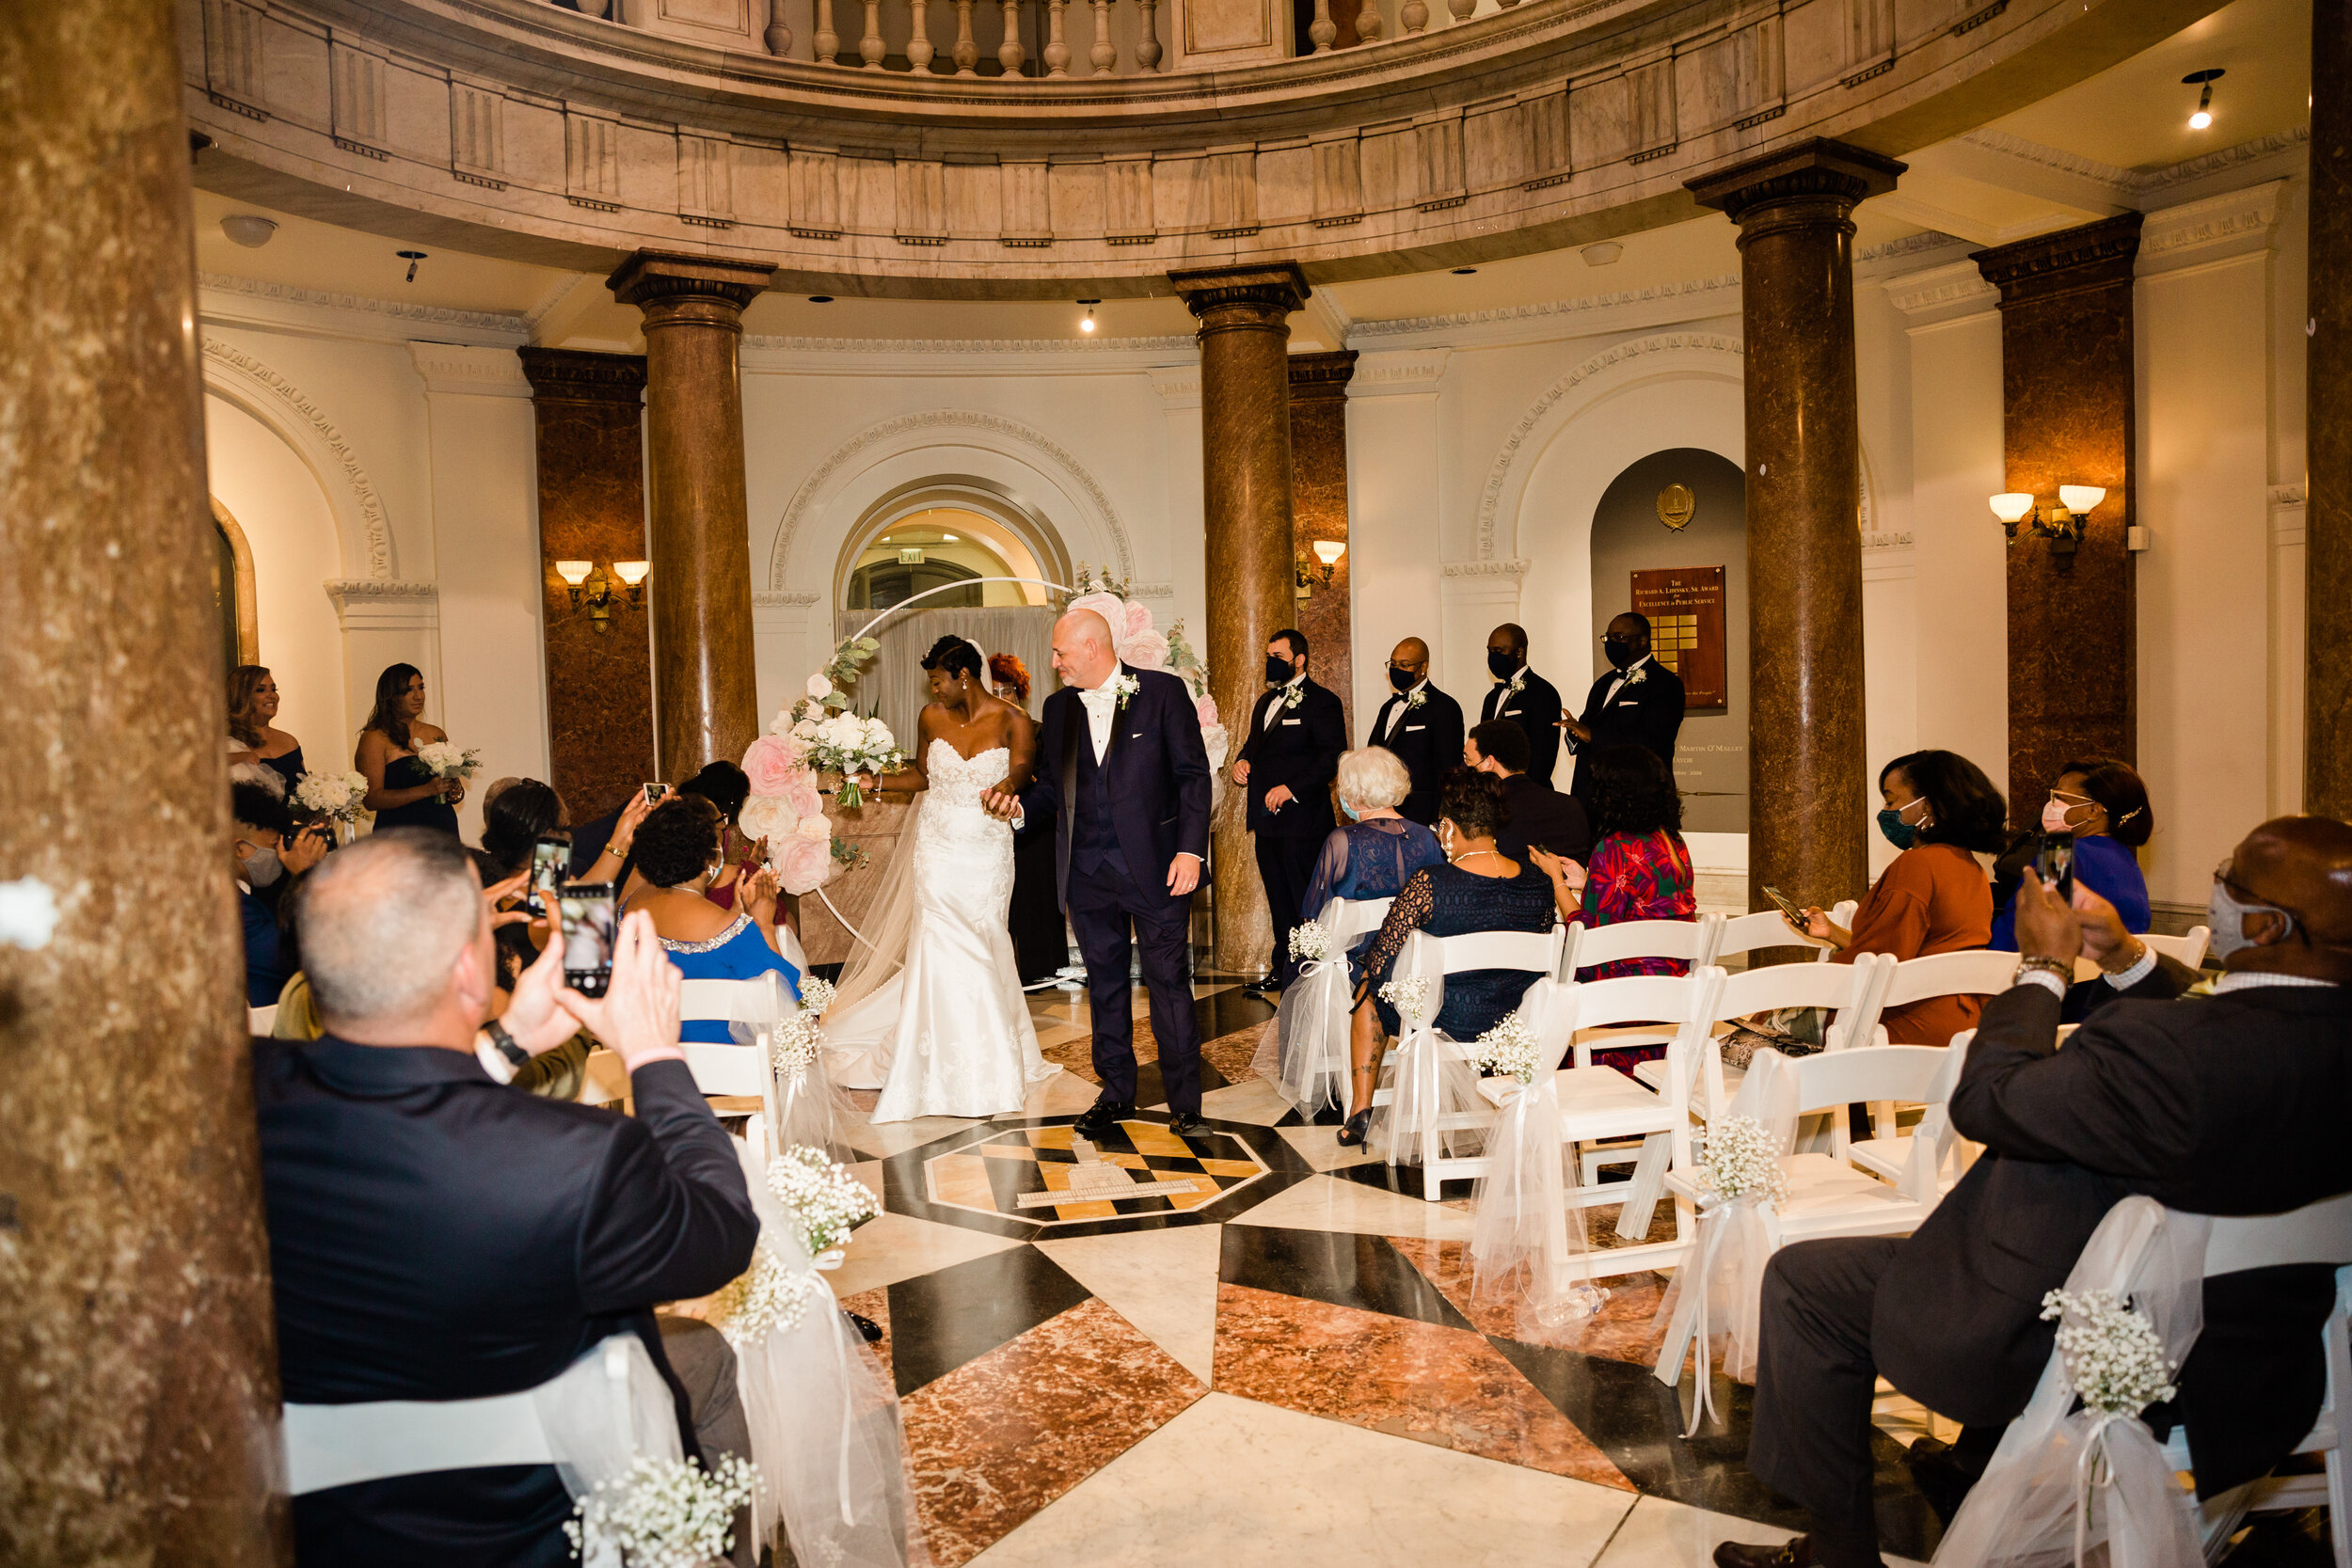 get married in baltimore city hall shot by megapixels media biracial couple wedding photographers maryland-76.jpg